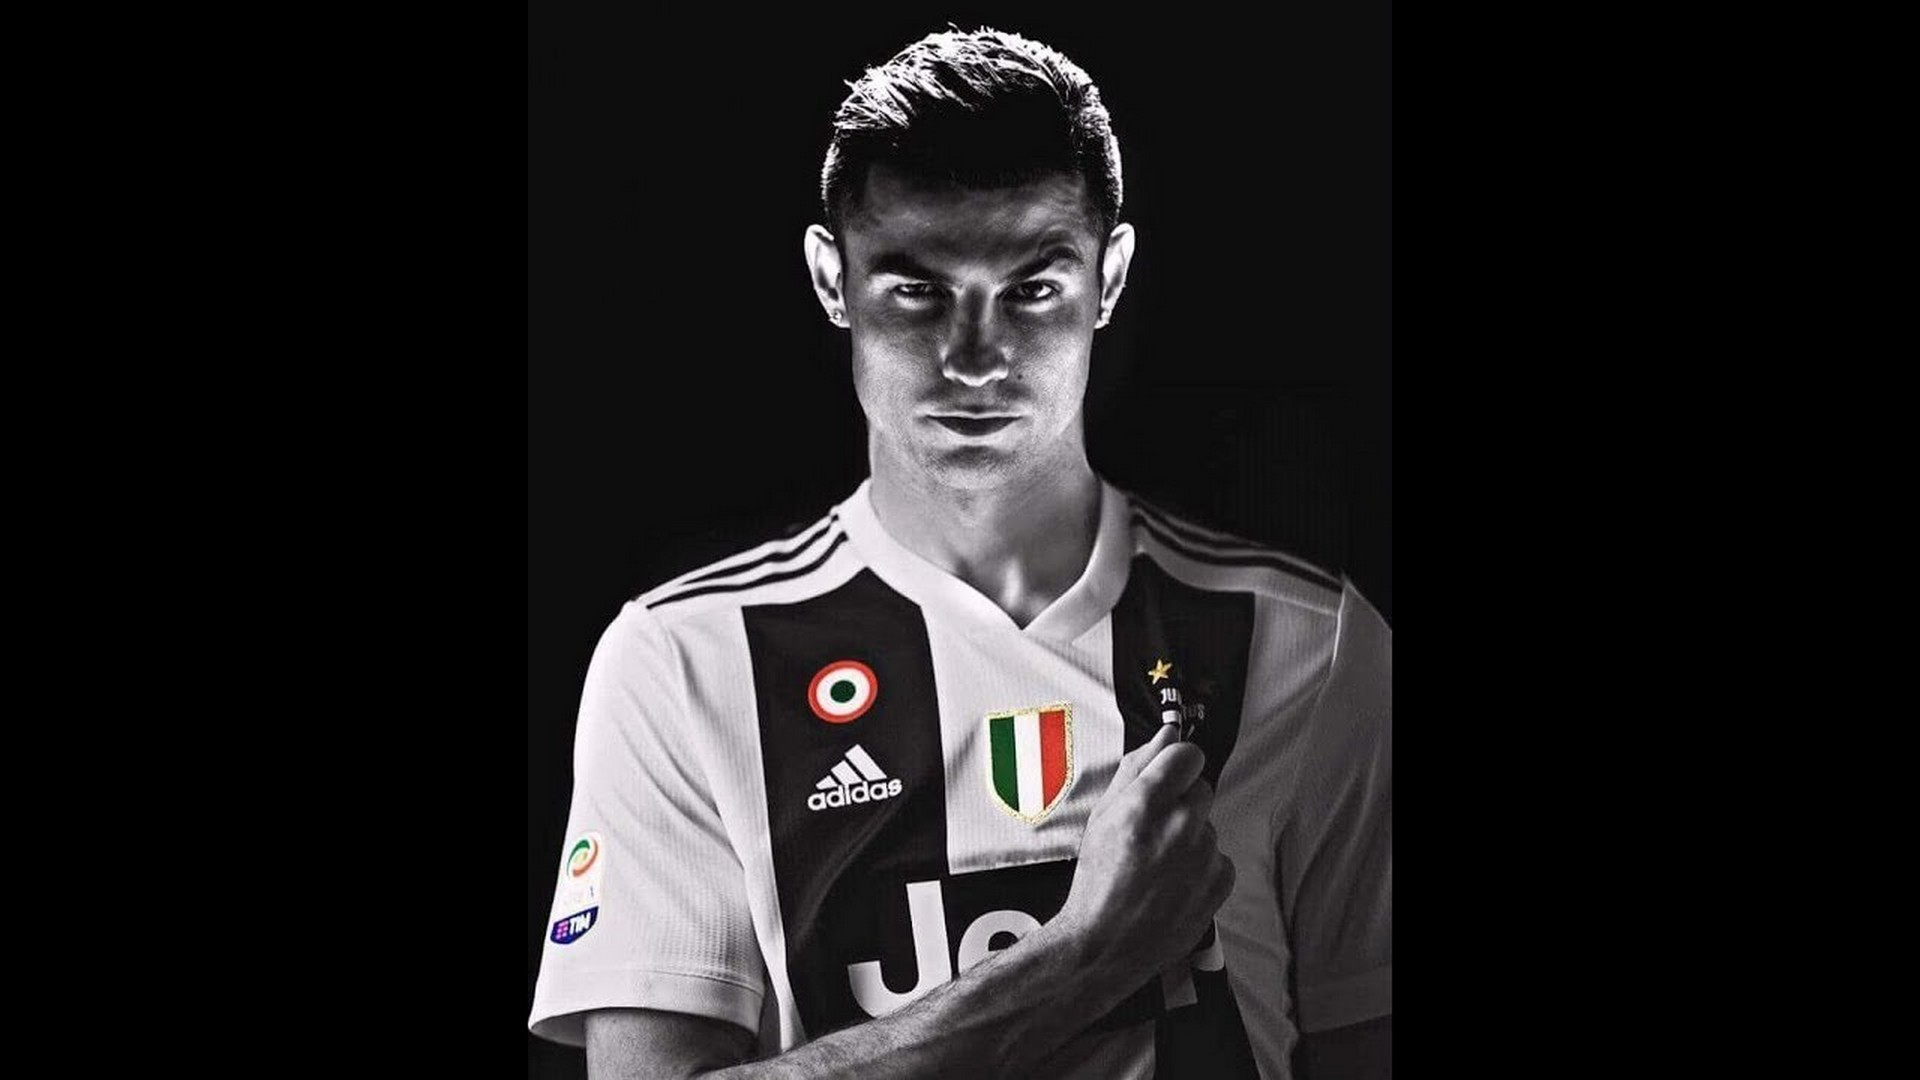 HD Wallpaper Cristiano Ronaldo Juventus with image resolution 1920x1080 pixel. You can make this wallpaper for your Desktop Computer Backgrounds, Mac Wallpapers, Android Lock screen or iPhone Screensavers